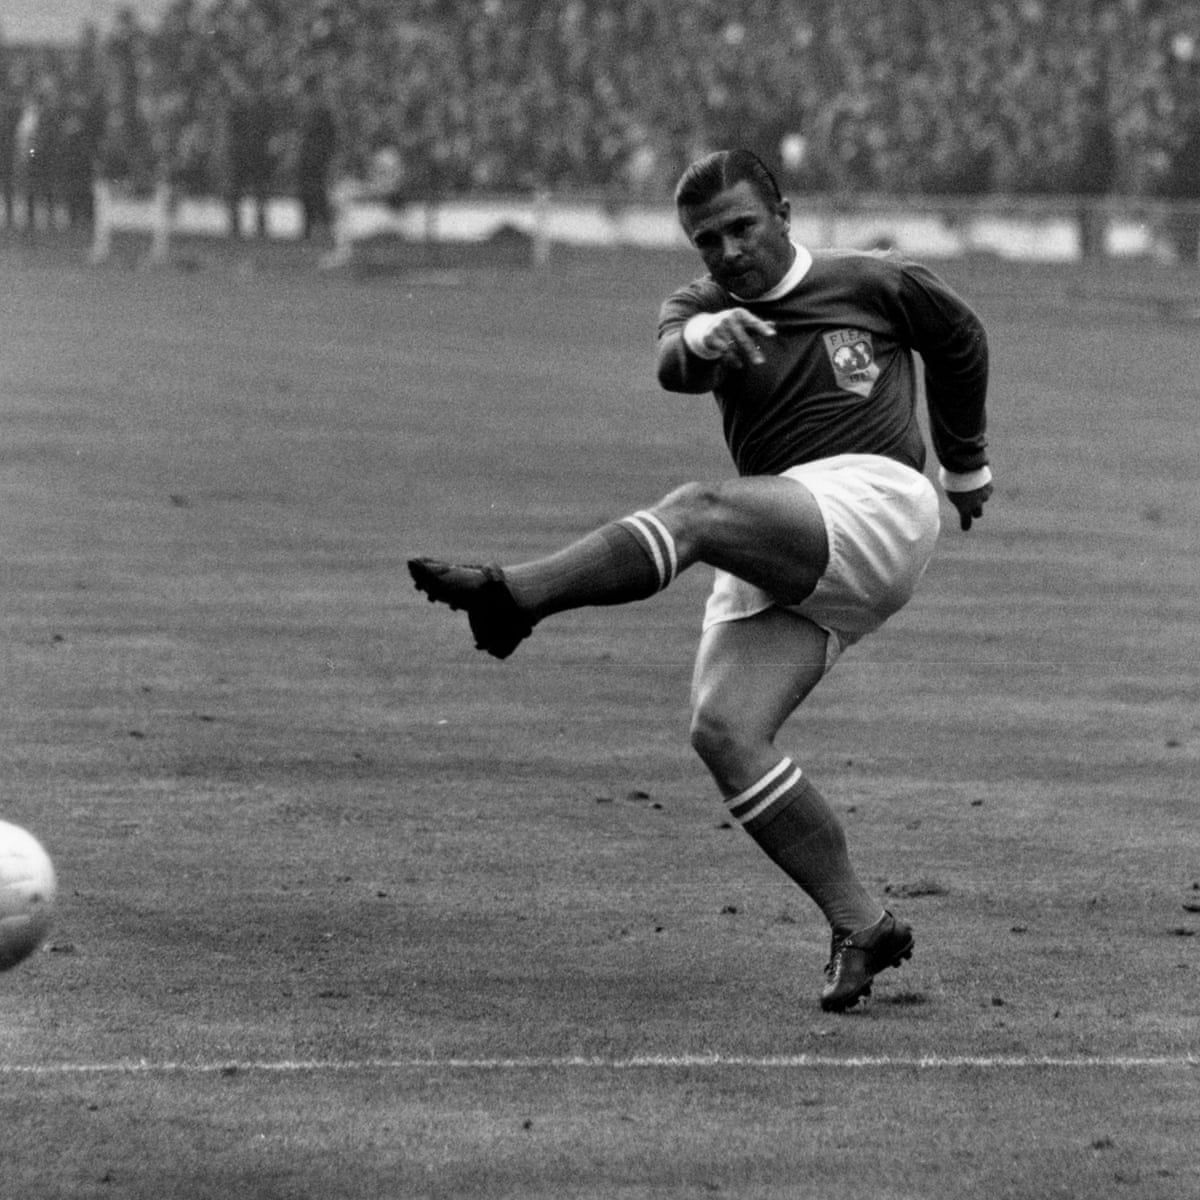 Ferenc Puskas in action during a charity match in Merseyside (Liverpool, England)